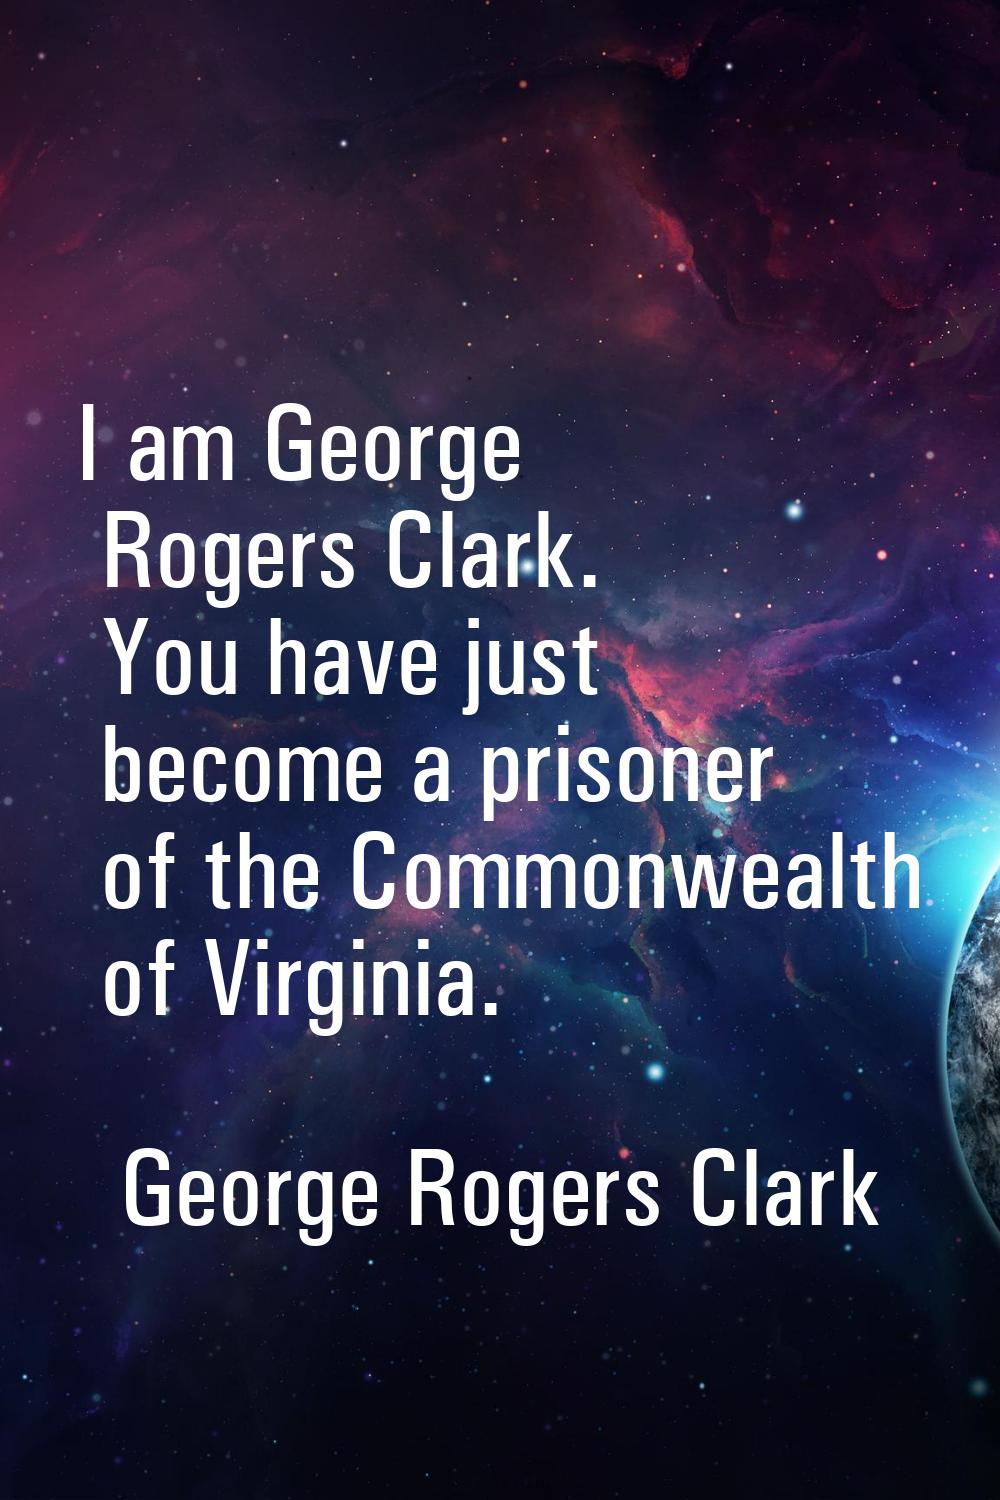 I am George Rogers Clark. You have just become a prisoner of the Commonwealth of Virginia.